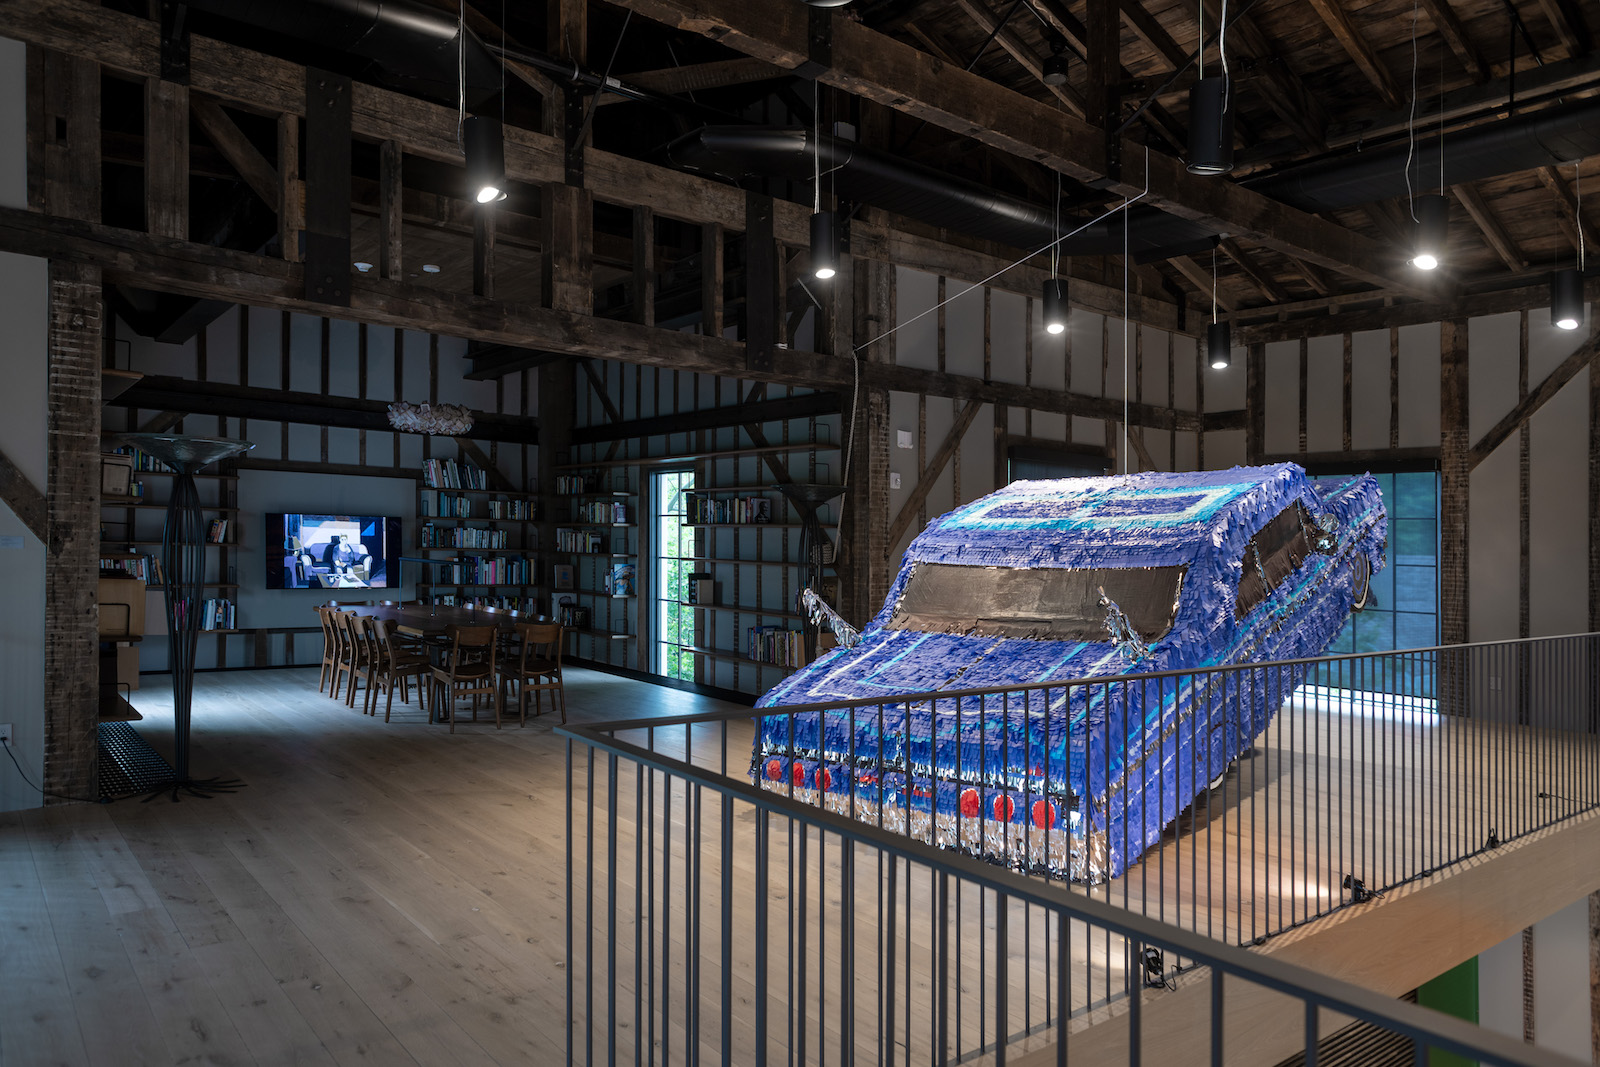 installation view of road rage at the church, showing sparkling blue car made of confetti pieces hanging